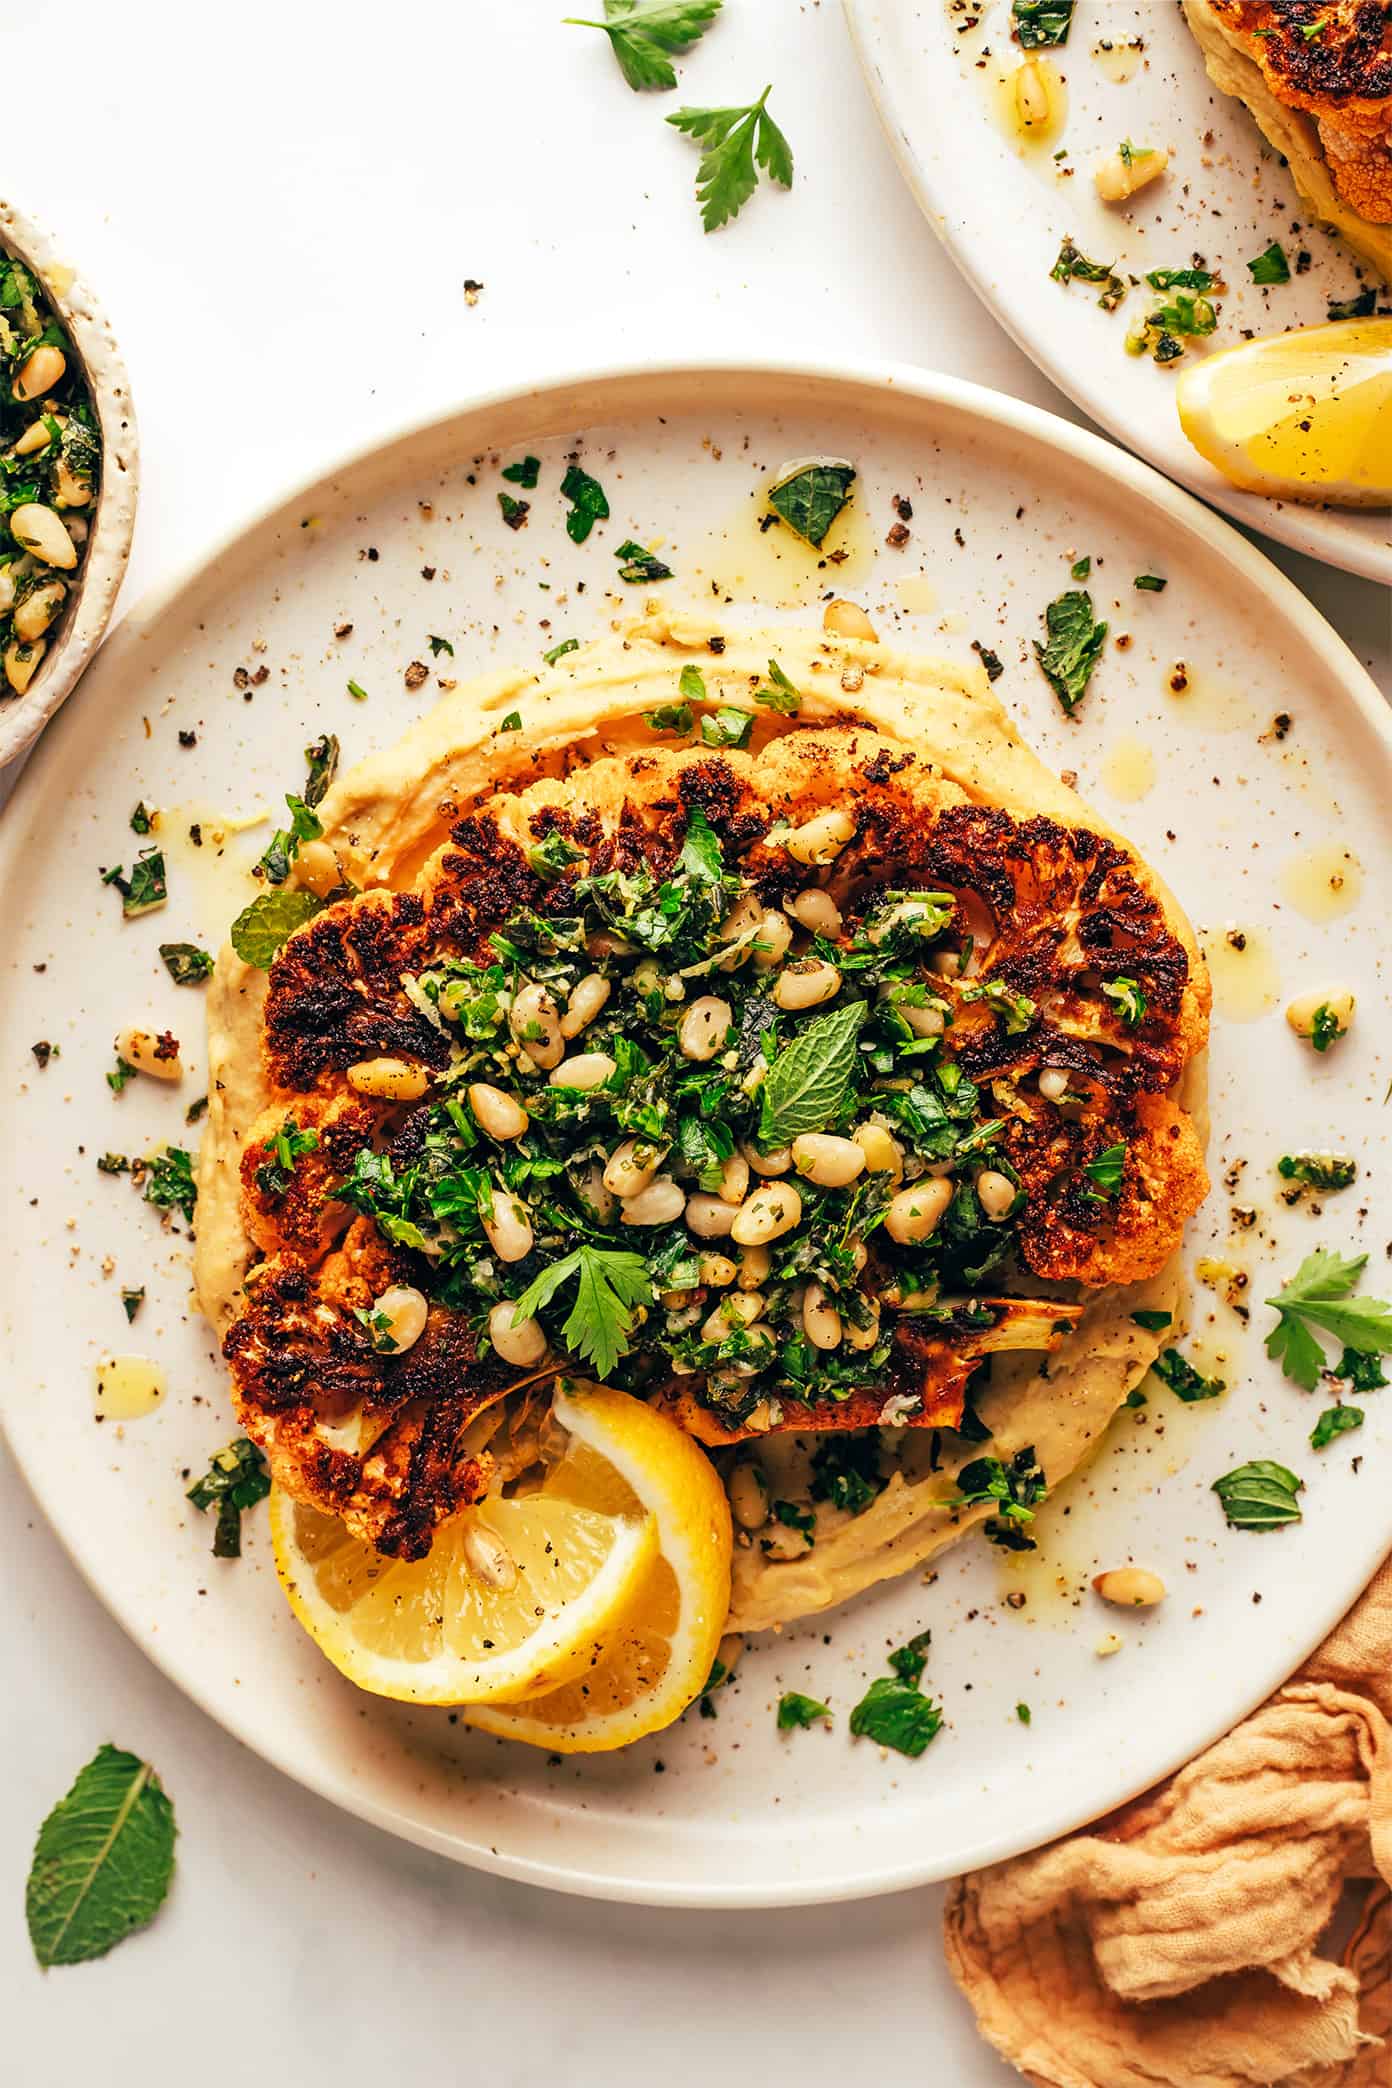 Cauliflower Steaks with Hummus and Gremolata on Serving Plates